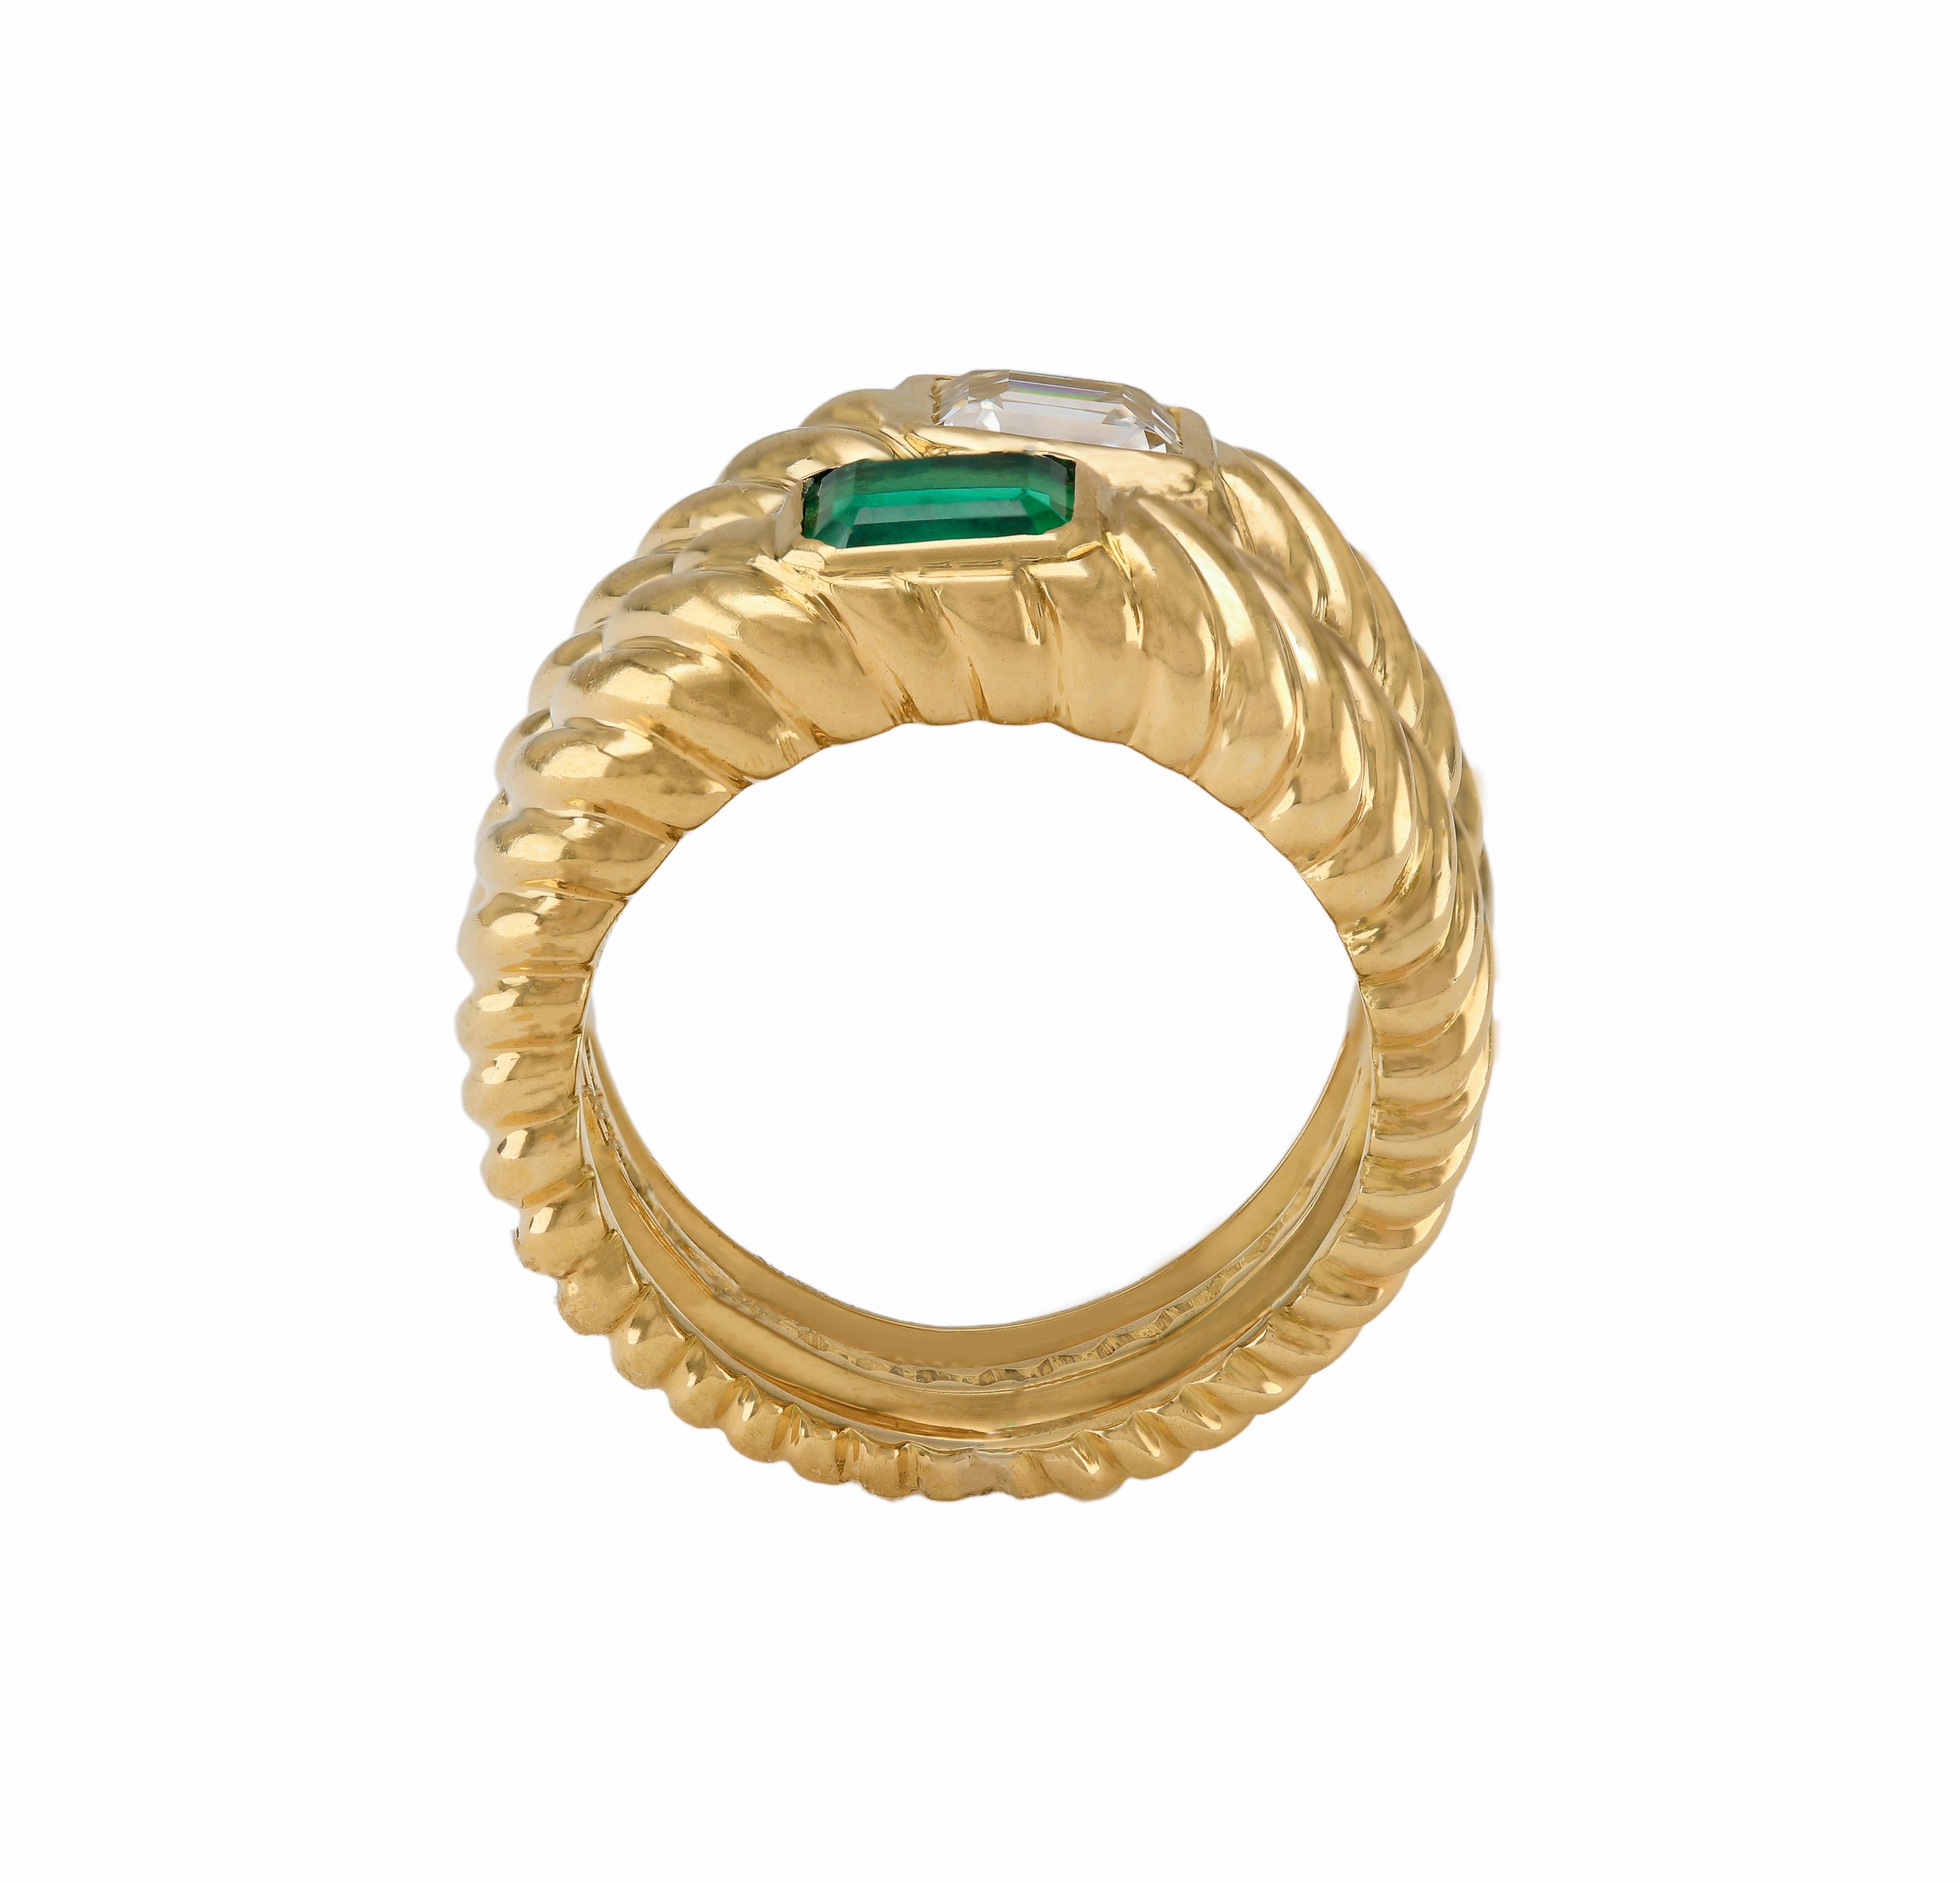 18k Solid “Toi et Moi” Emerald Cut 1.00ct Diamond Columbian Emerald Twin Ring
Beautiful very heavy Antique 1960’s Twin ring. Handcrafted with 15.0 grams of solid 18k gold, the ring exhibits the “toi et moi” ensemble, In French meaning “you and me”.